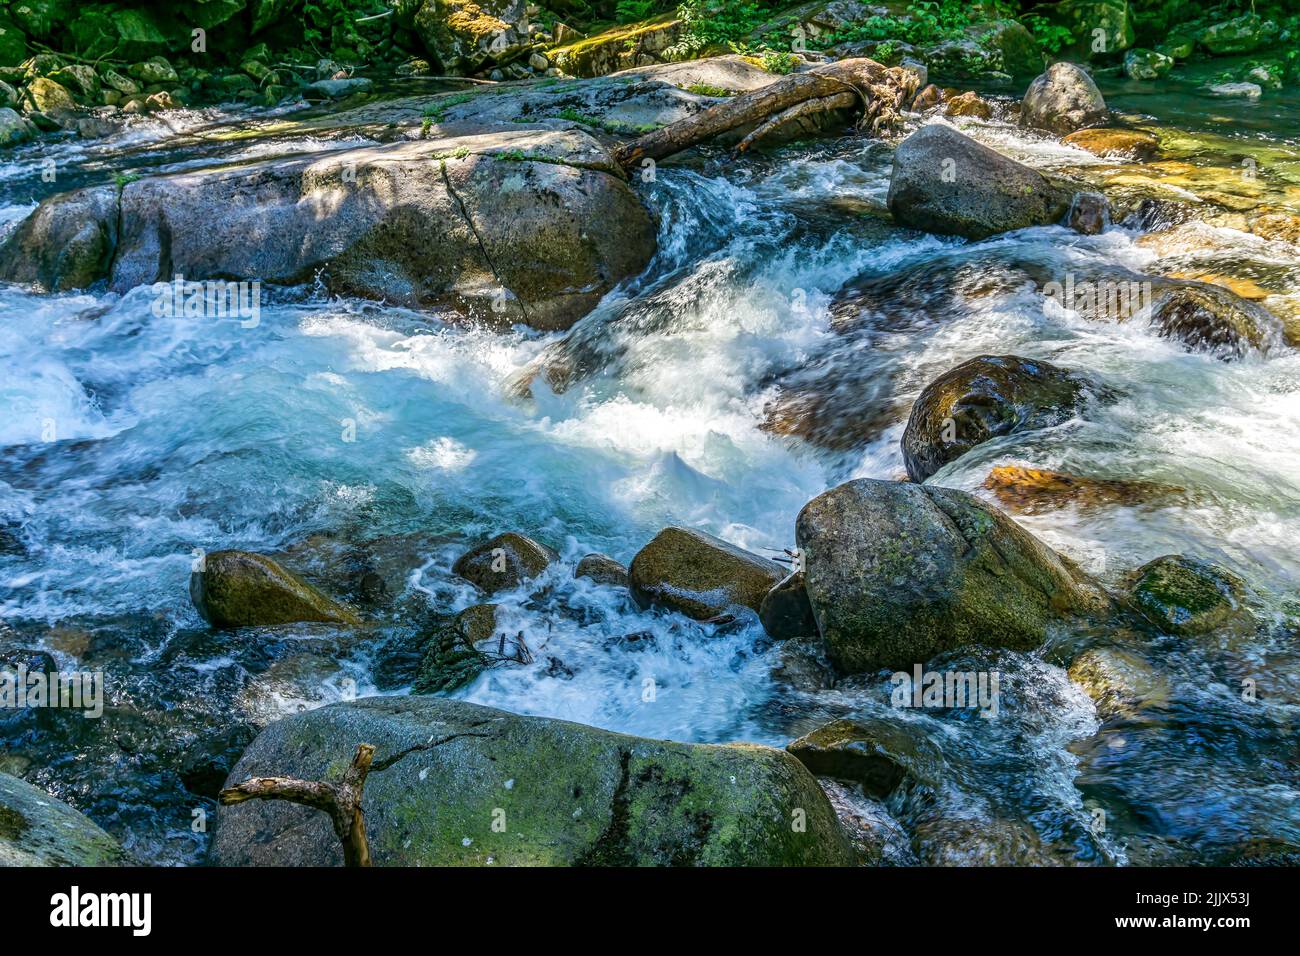 Rapids create whitewater at Denny Creek in Washington State. Stock Photo